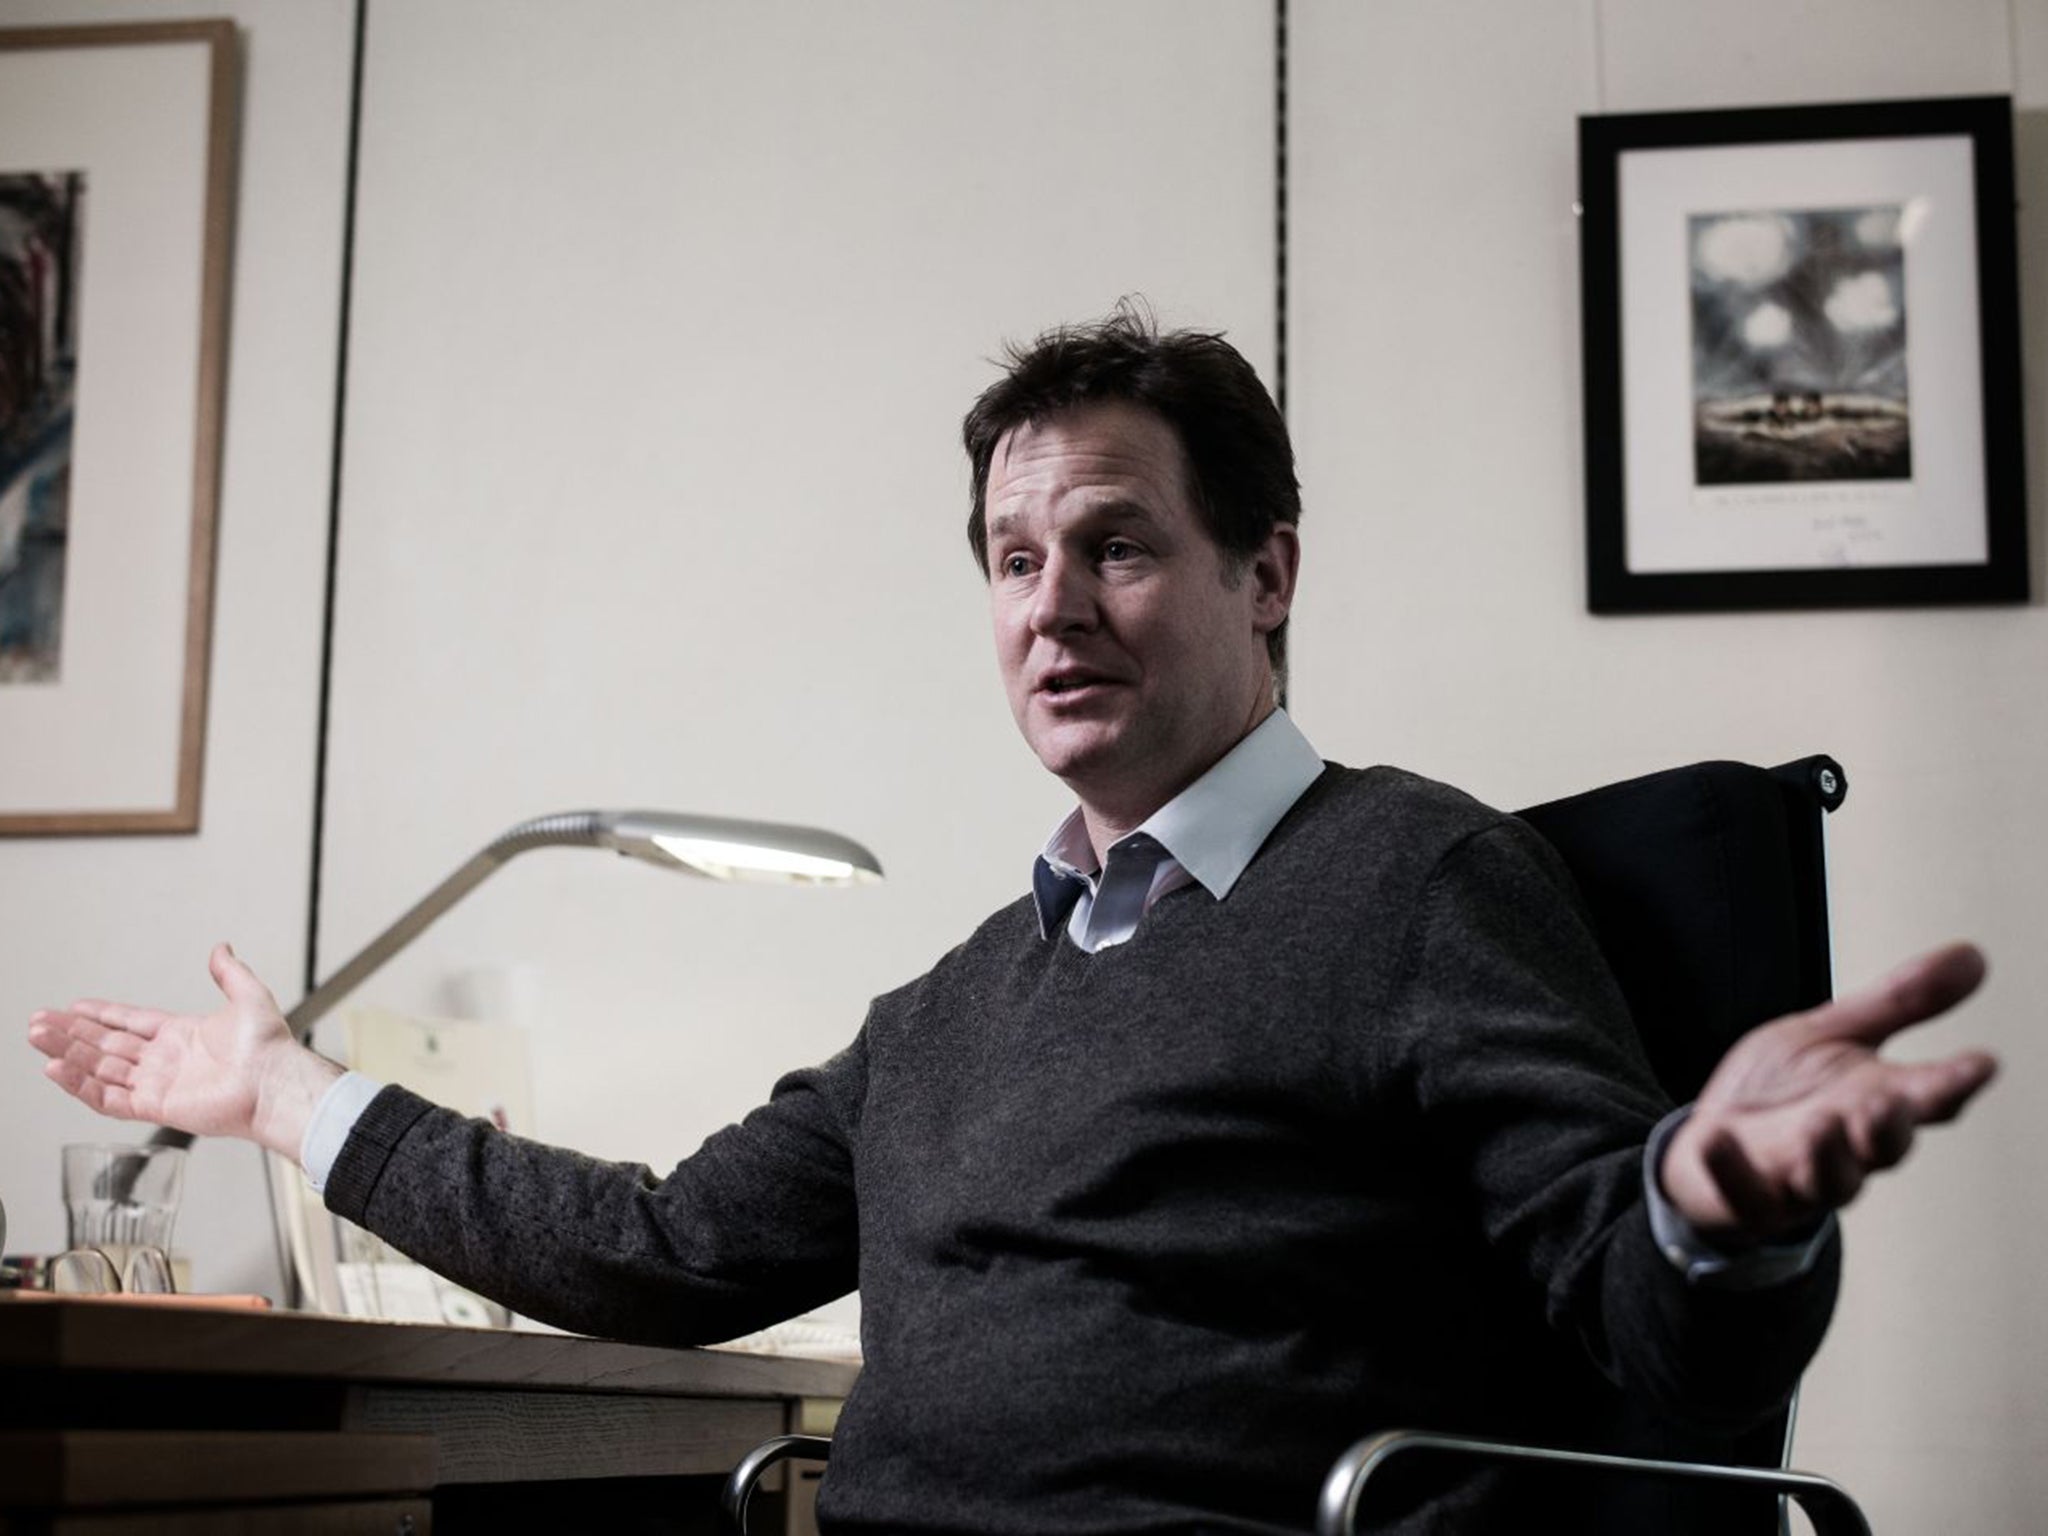 Nick Clegg wants Britain?‘to lead Europe in economic reform, security, and the environment’